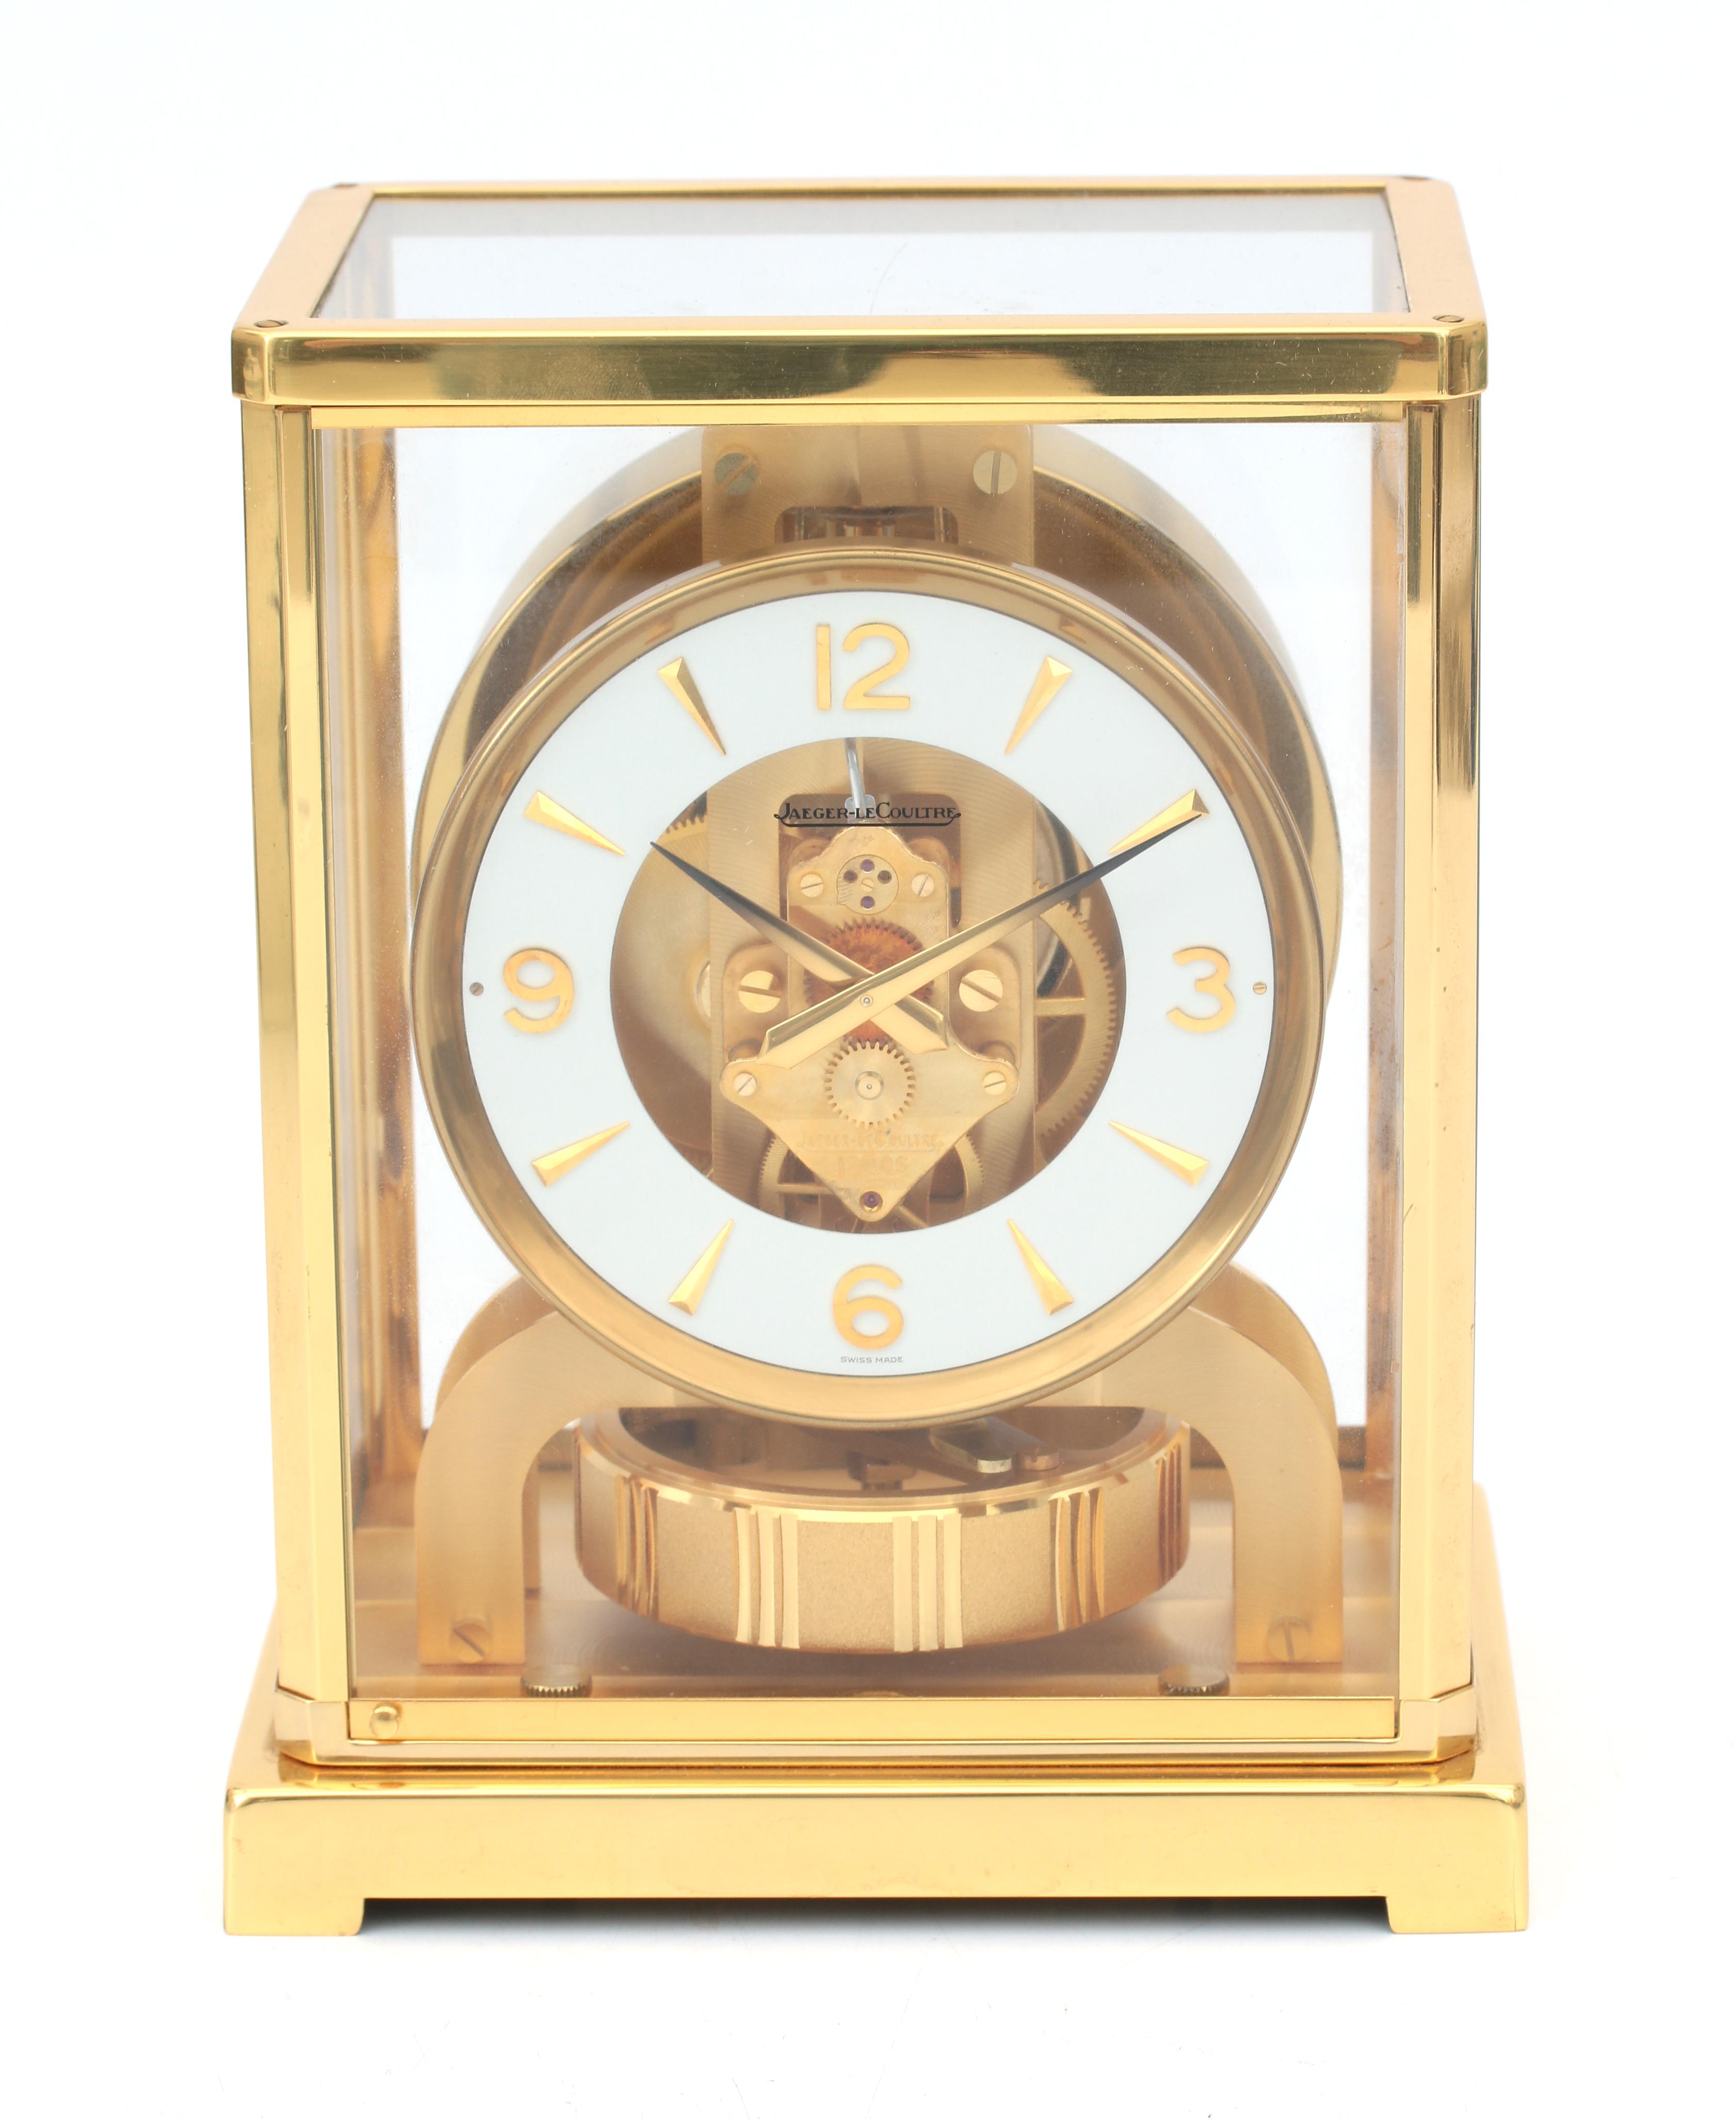 A perpetuum moving clock in gold-plated metal and glass case, Jaeger leCoultre, Swizerland, circa 19